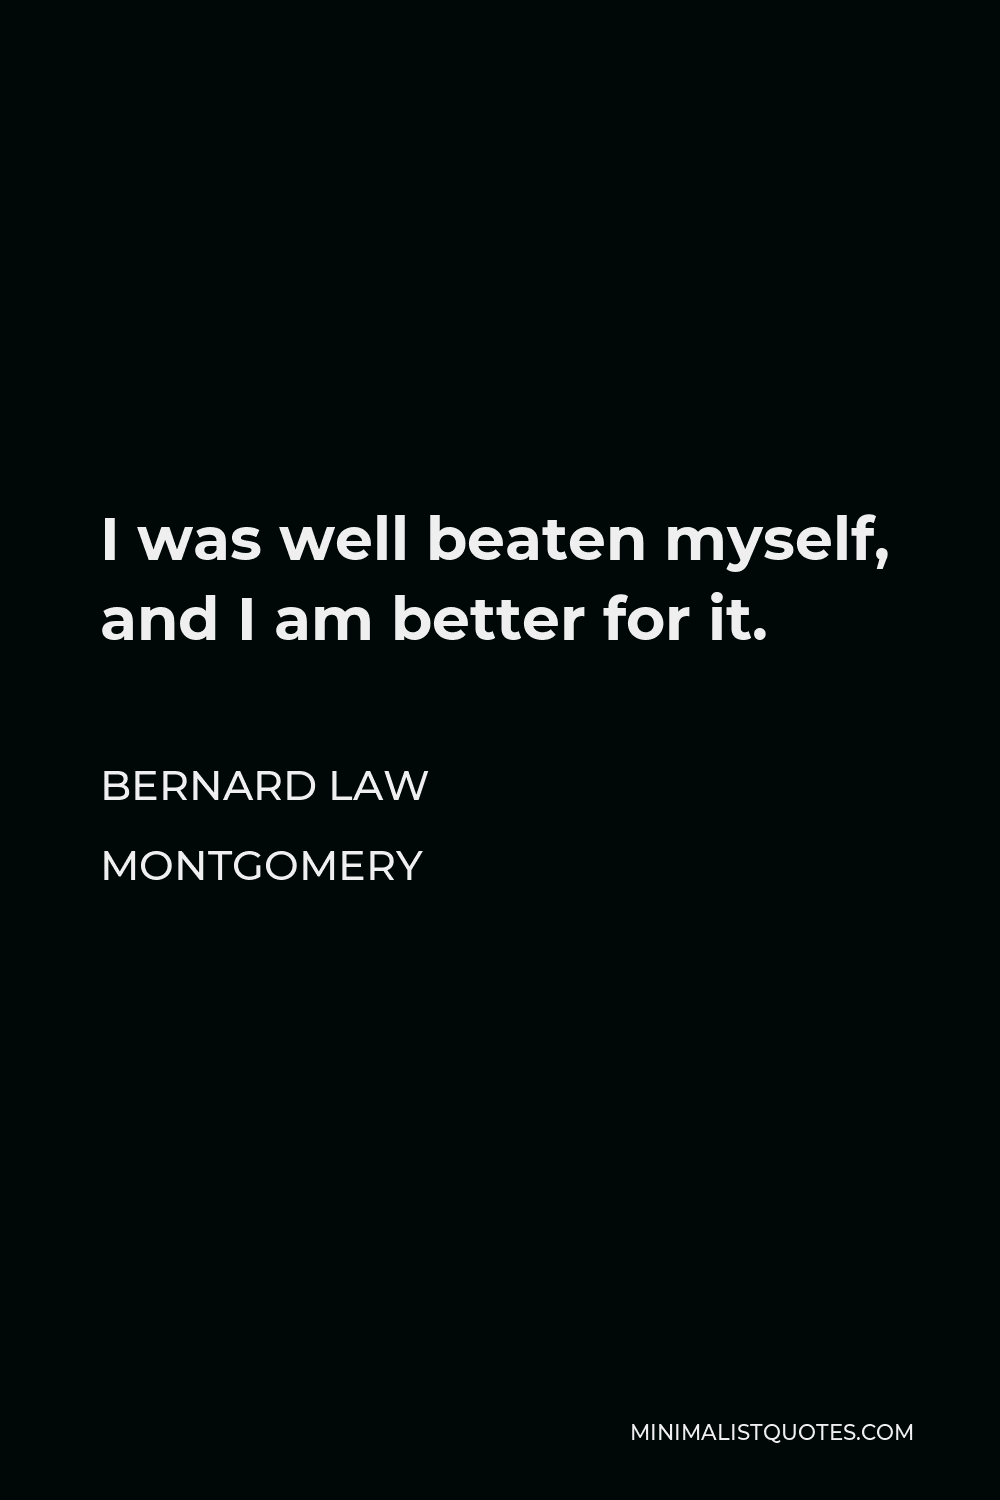 Bernard Law Montgomery Quote - I was well beaten myself, and I am better for it.